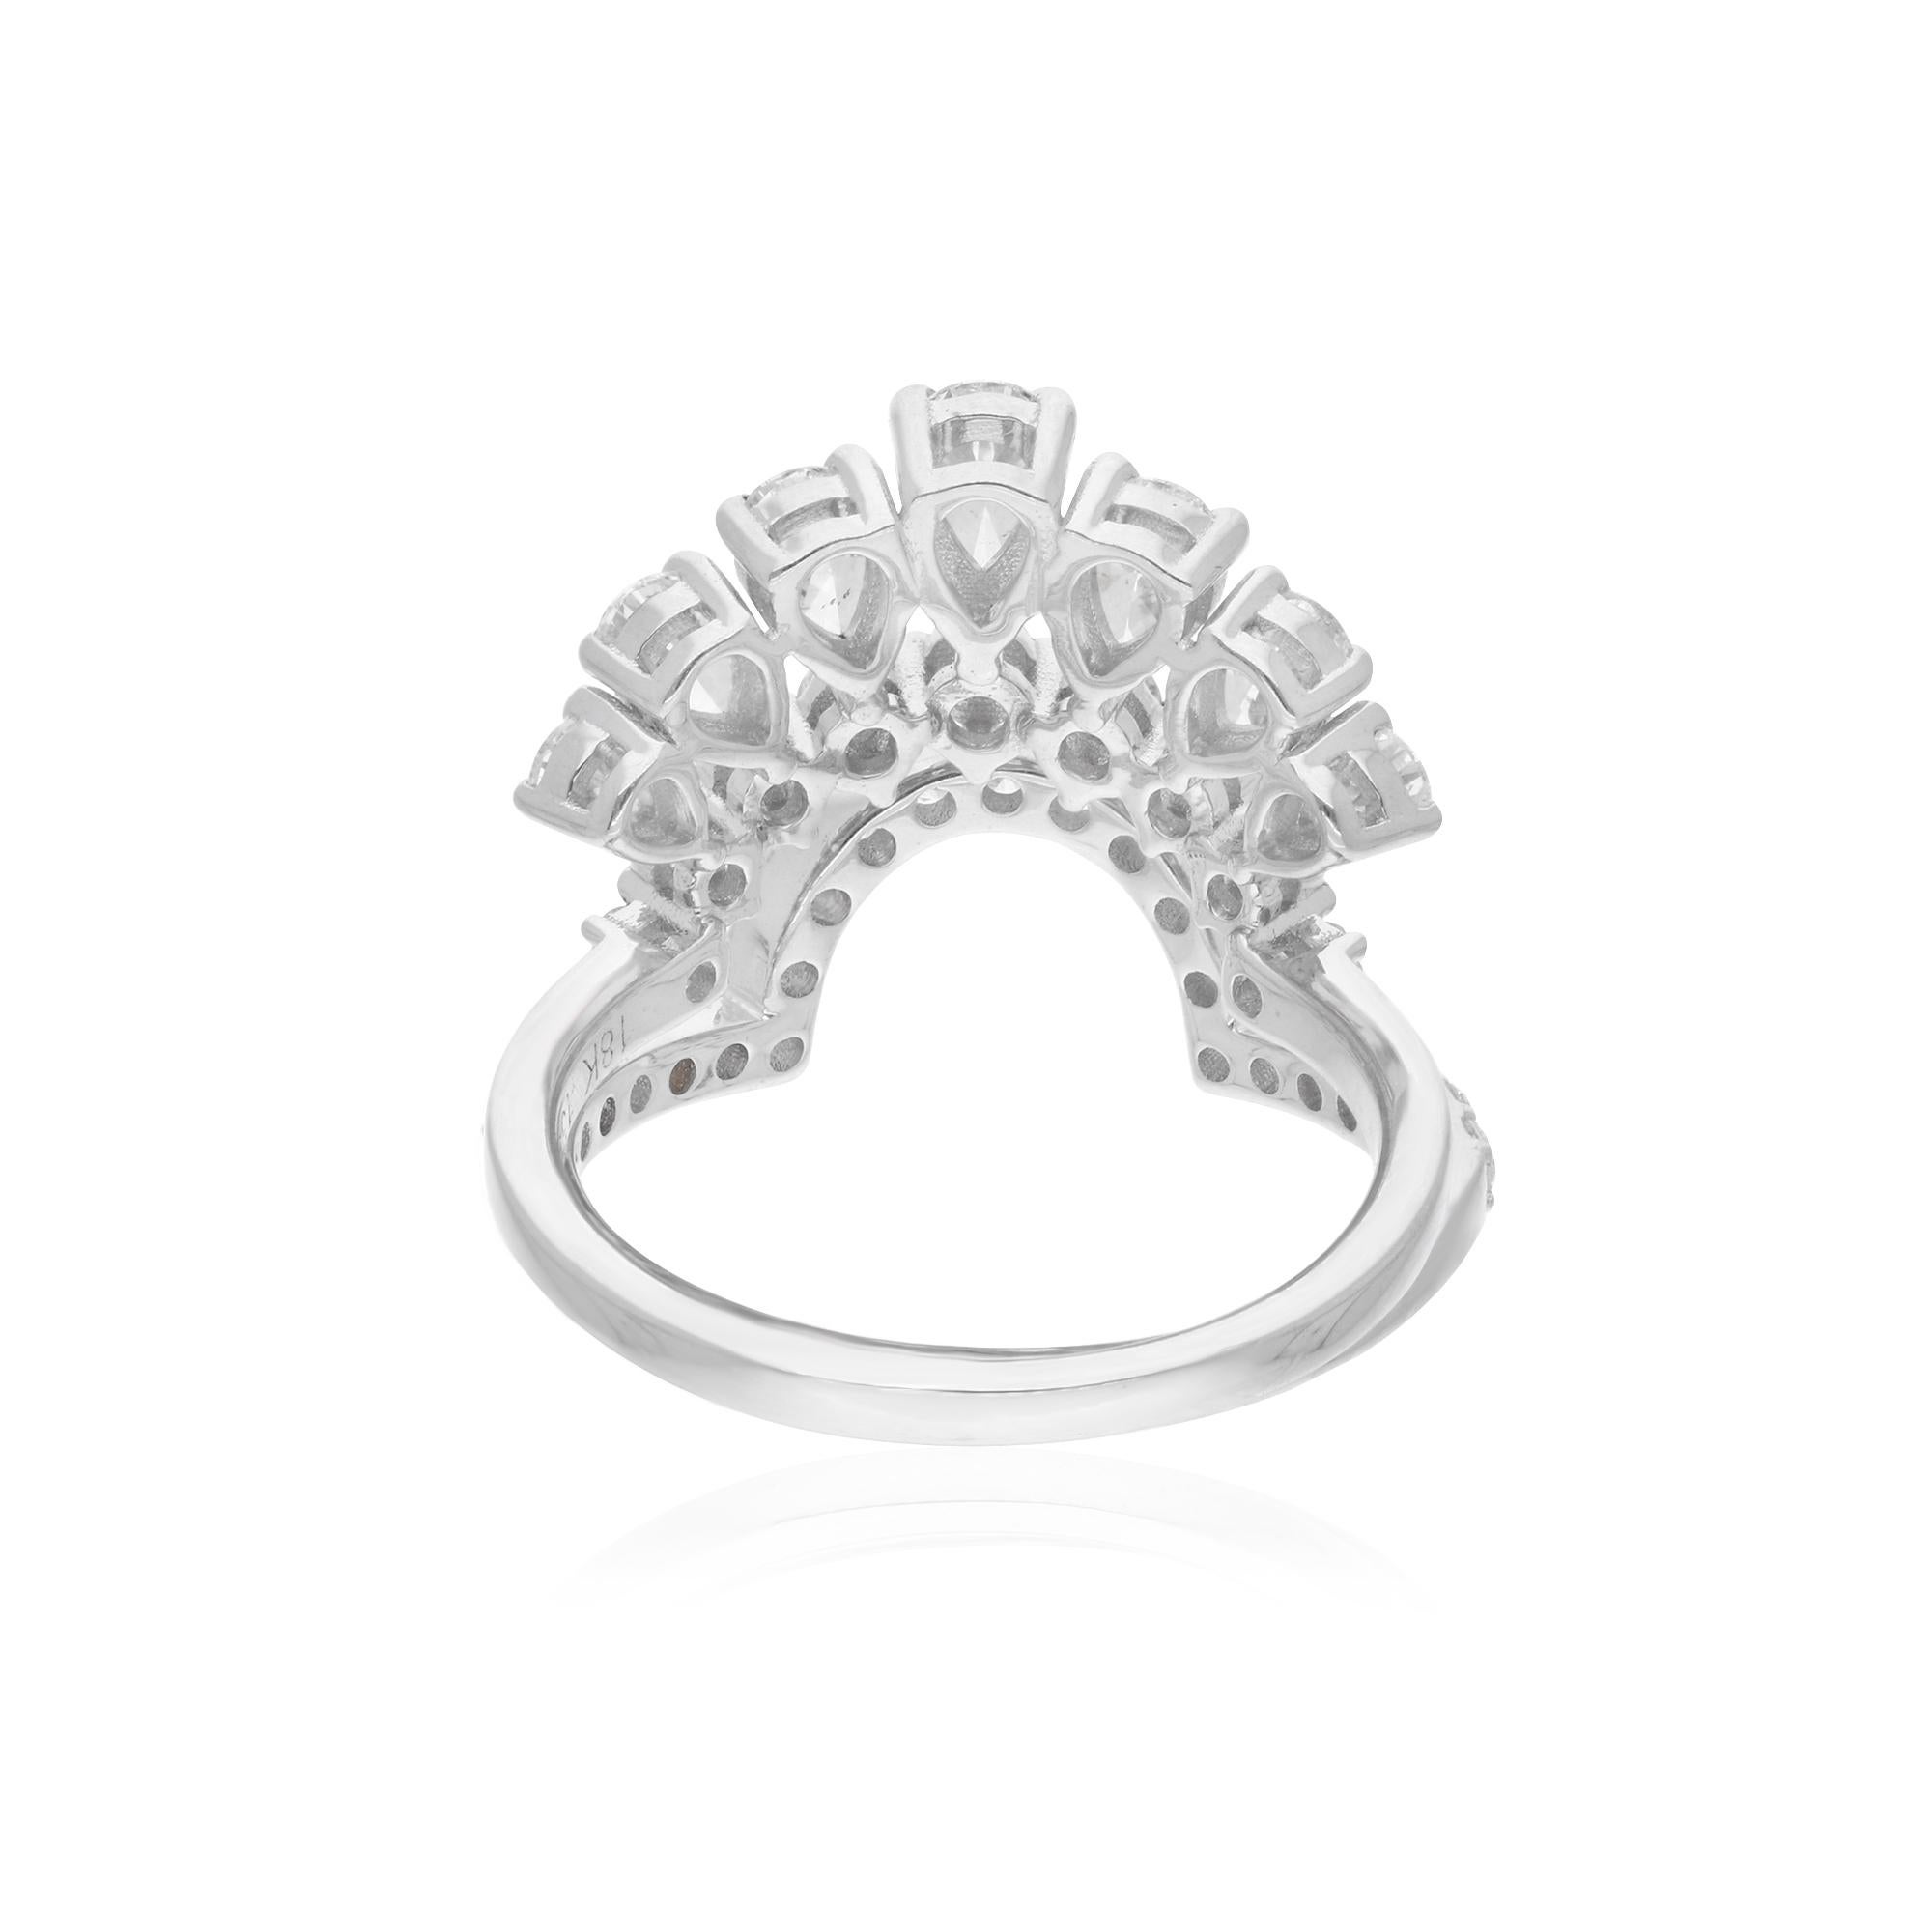 Modern 1.53 Carat Pear & Round Diamond Stackable Ring Set 18 Karat White Gold Jewelry For Sale